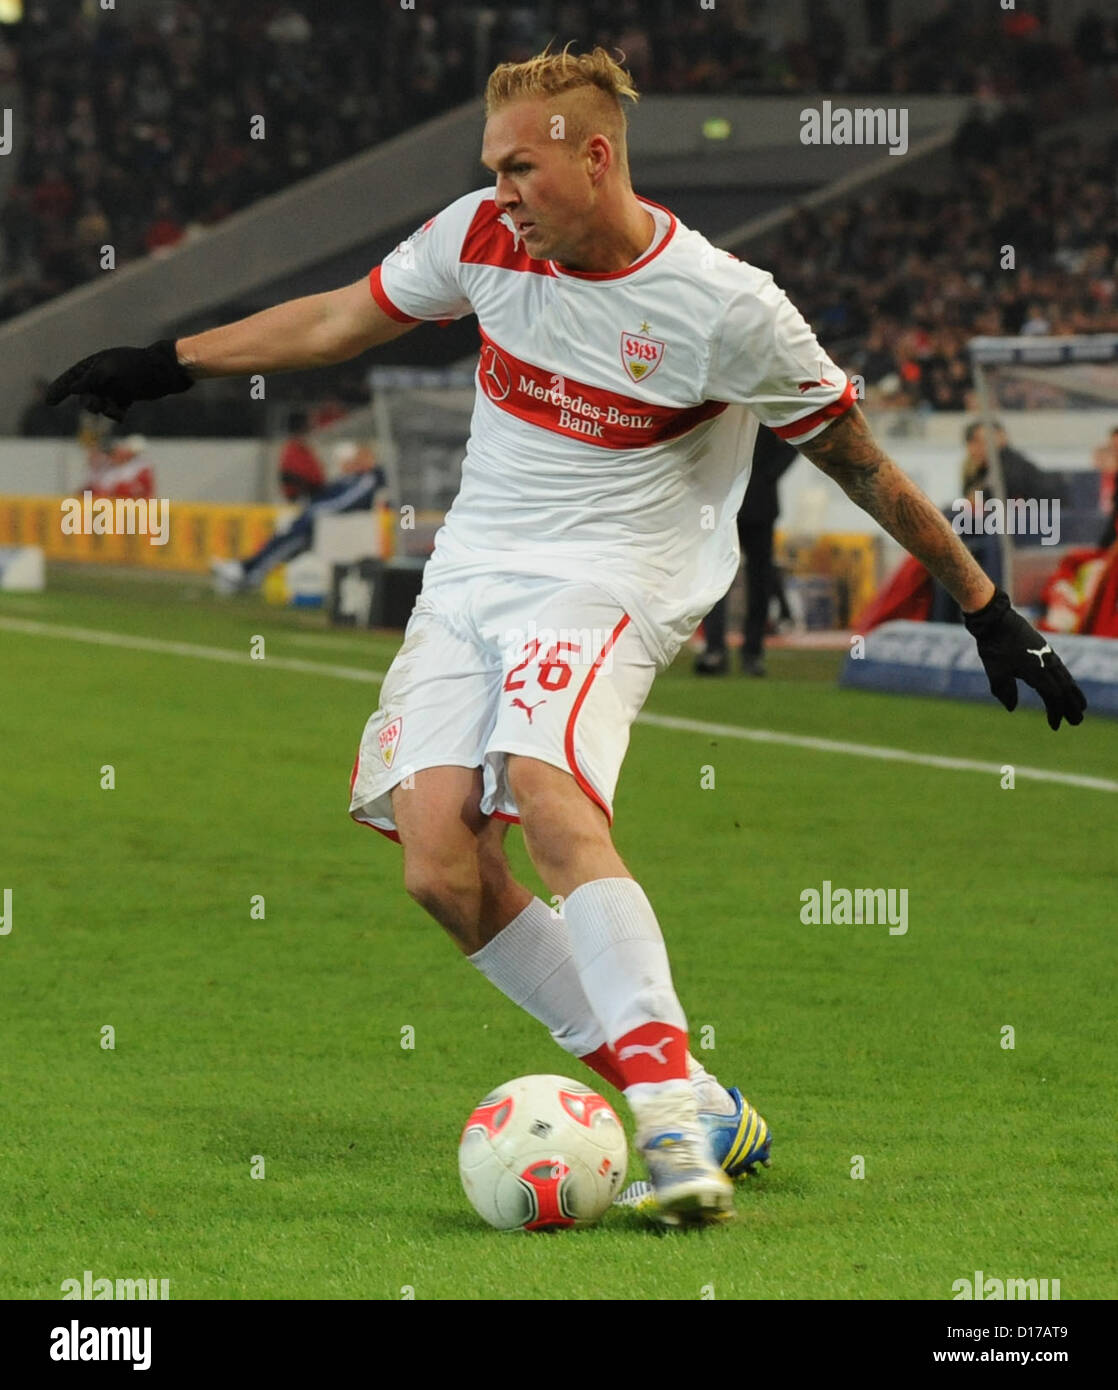 Stuttgart's Raphael Holzhauser plays ball during Bundesliga soccer match between VfB Stuttgart FC Schalke Mercedes Benz Arena in Stutgart Germany 08 December 2012 Photo: MARIJAN MURAT (ATTENTION: EMBARGO CONDITIONS! DFL permits further utilisation up 15 pictures only (no sequntial pictures or video-similar series pictures allowed) via internet online media during match (including halftime) taken inside stadium and/or prior start match DFL permits unrestricted transmission digitised recordings during match exclusively internal editorial processing only (e.g via picture picture databases) Stock Photo